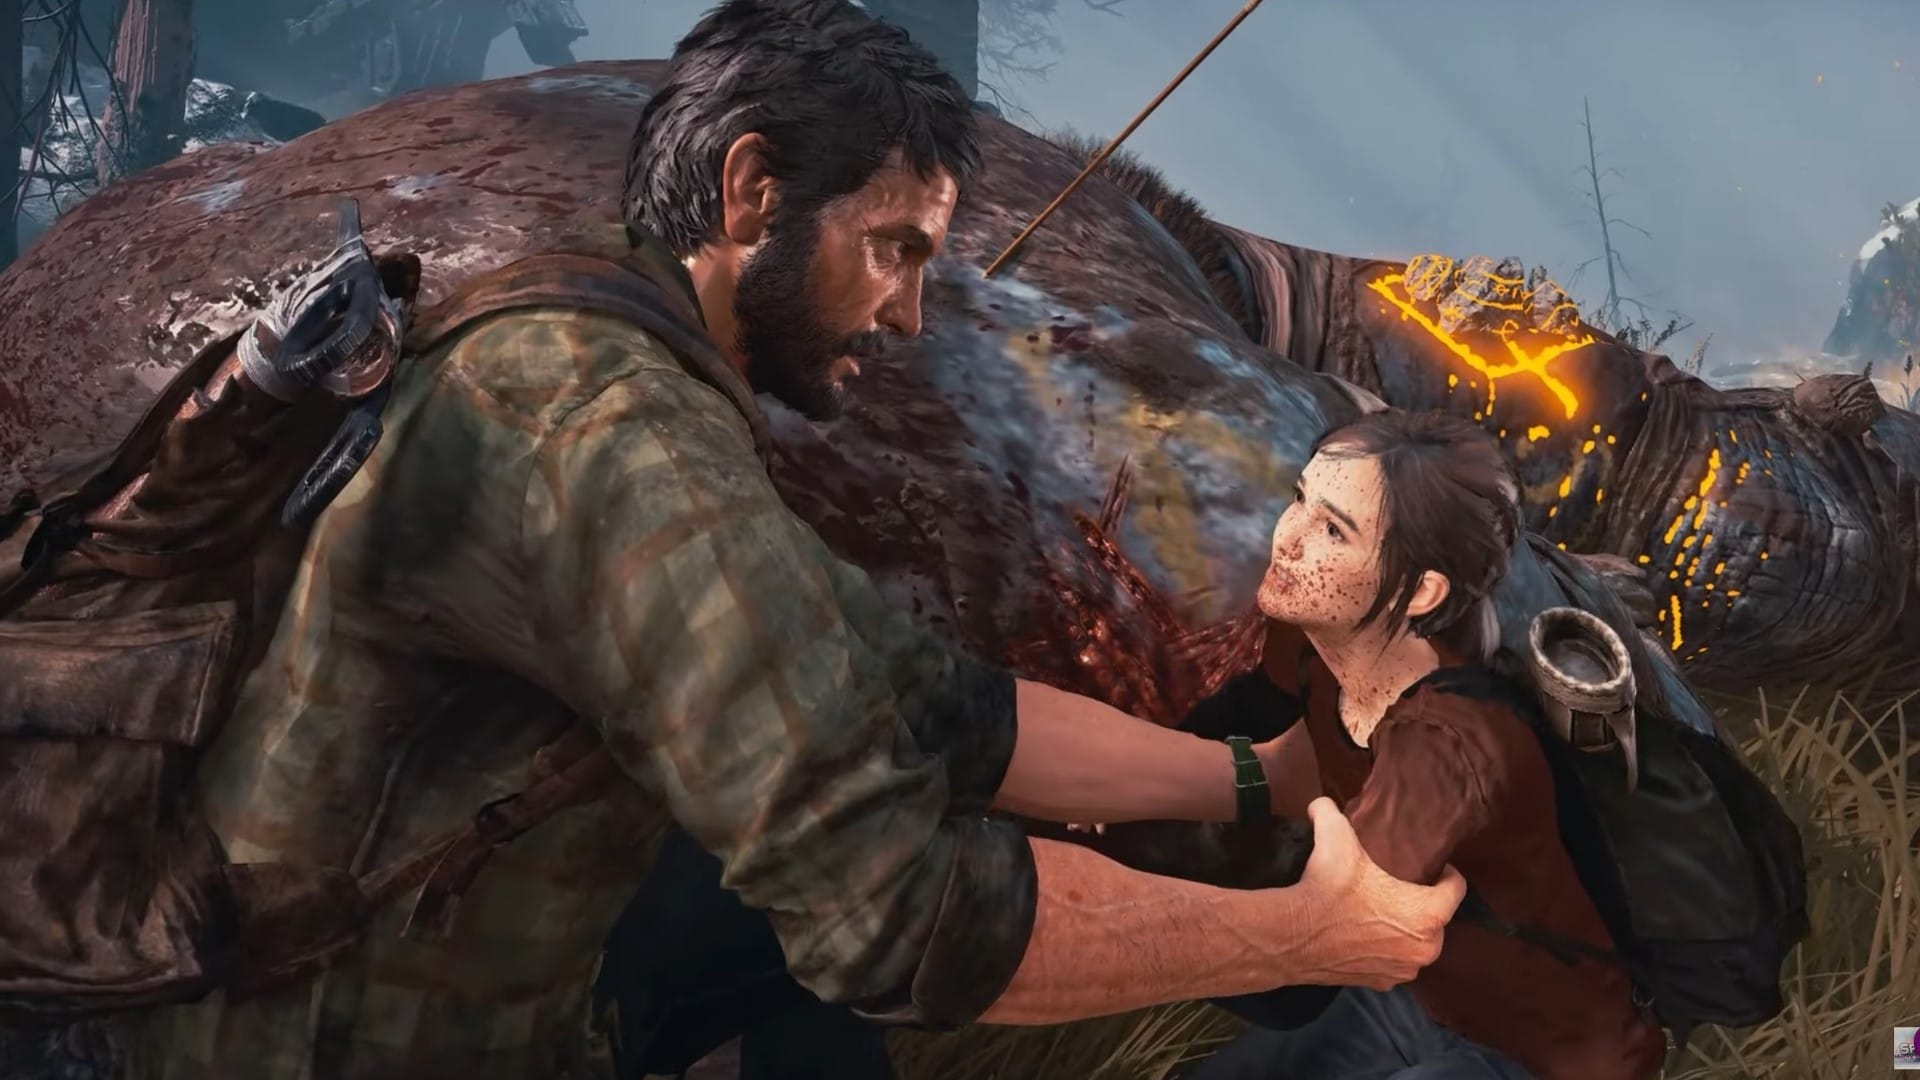 God of War: Fan Video Shows Crossover Featuring Joel and Ellie from The Last of Us